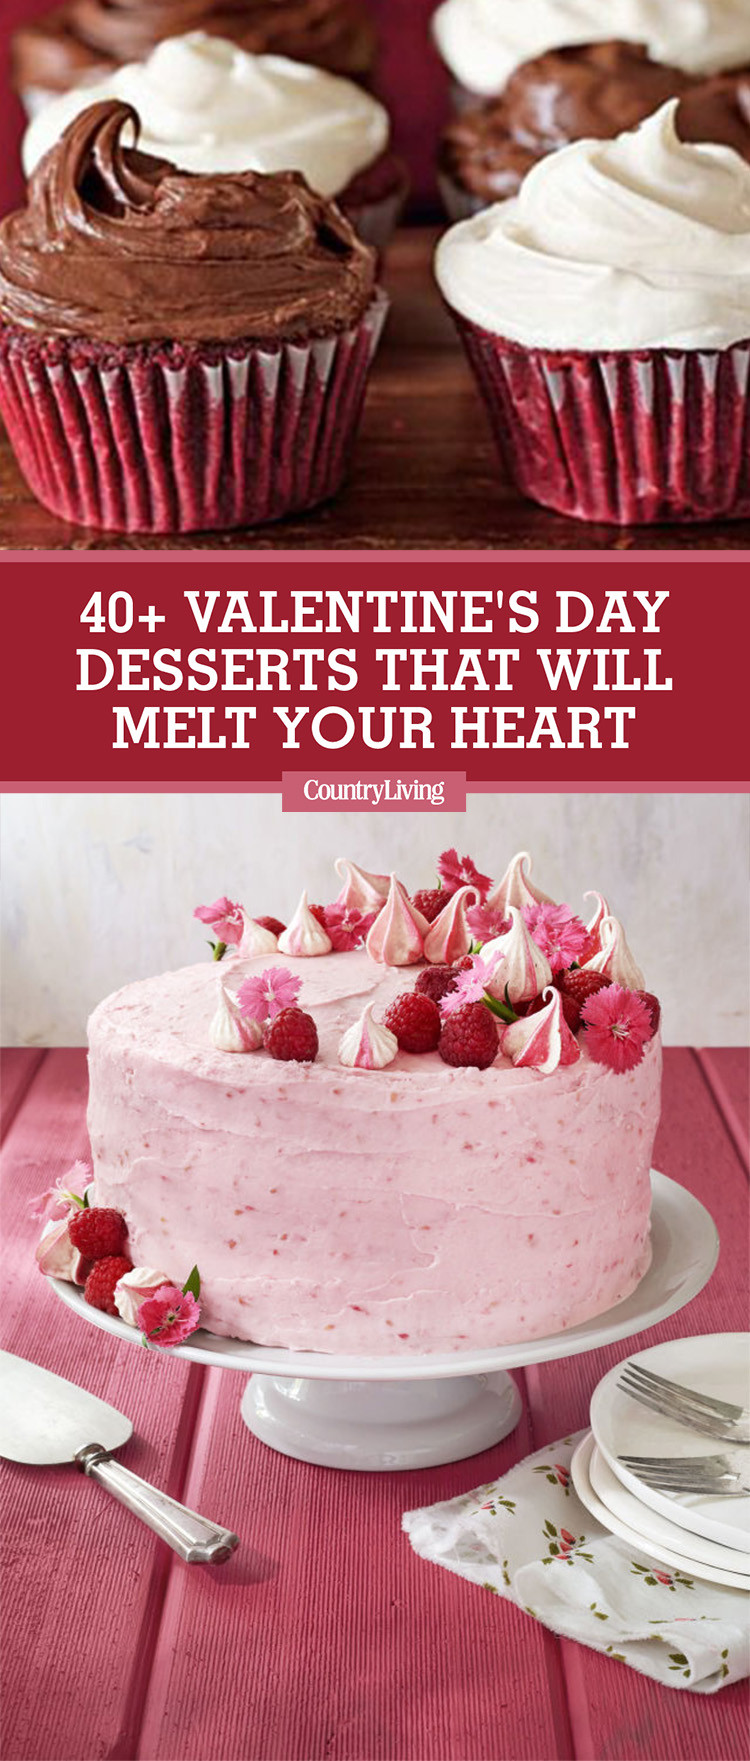 Desserts For Valentines Day
 42 Easy Valentine’s Day Desserts Best Recipes for